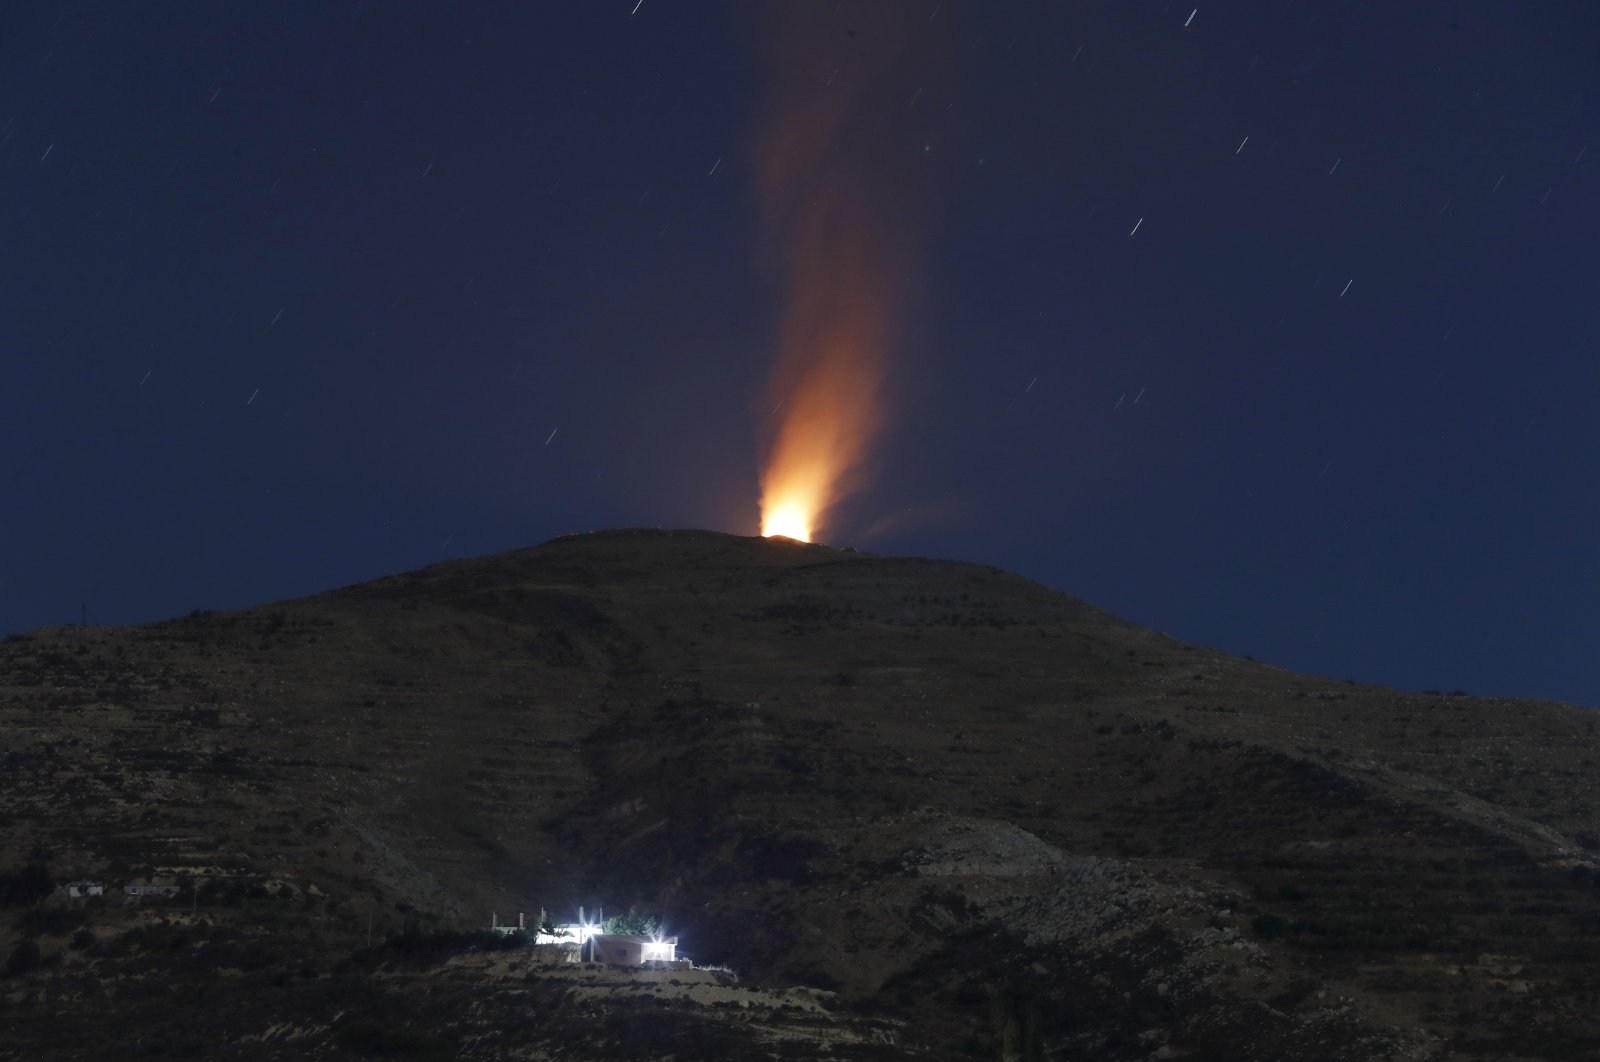 A long exposure picture taken from the Druze village of Majdal Shams in the annexed Golan Heights shows flames rising from the Syrian side of the border after an alleged strike, Aug. 17, 2021. (EPA Photo)